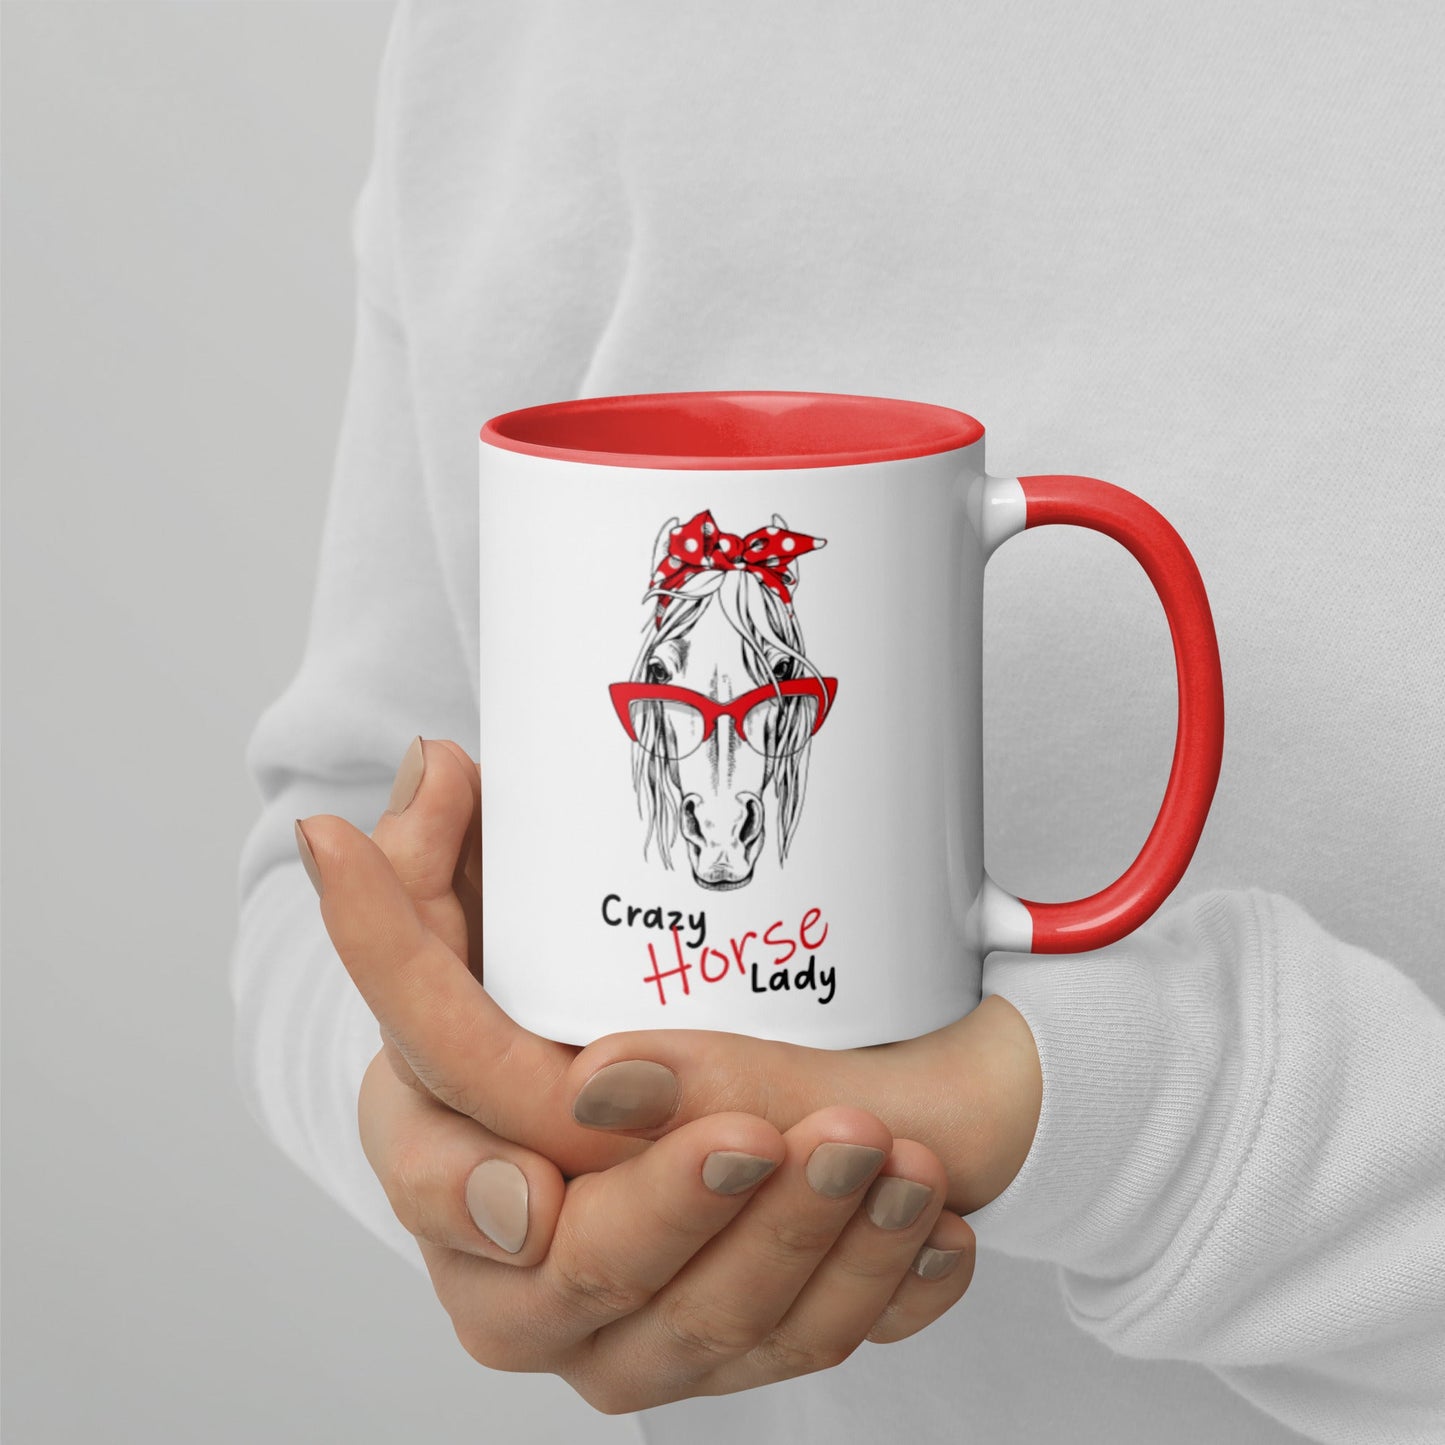 Crazy Horse Lady Mug (in-store)